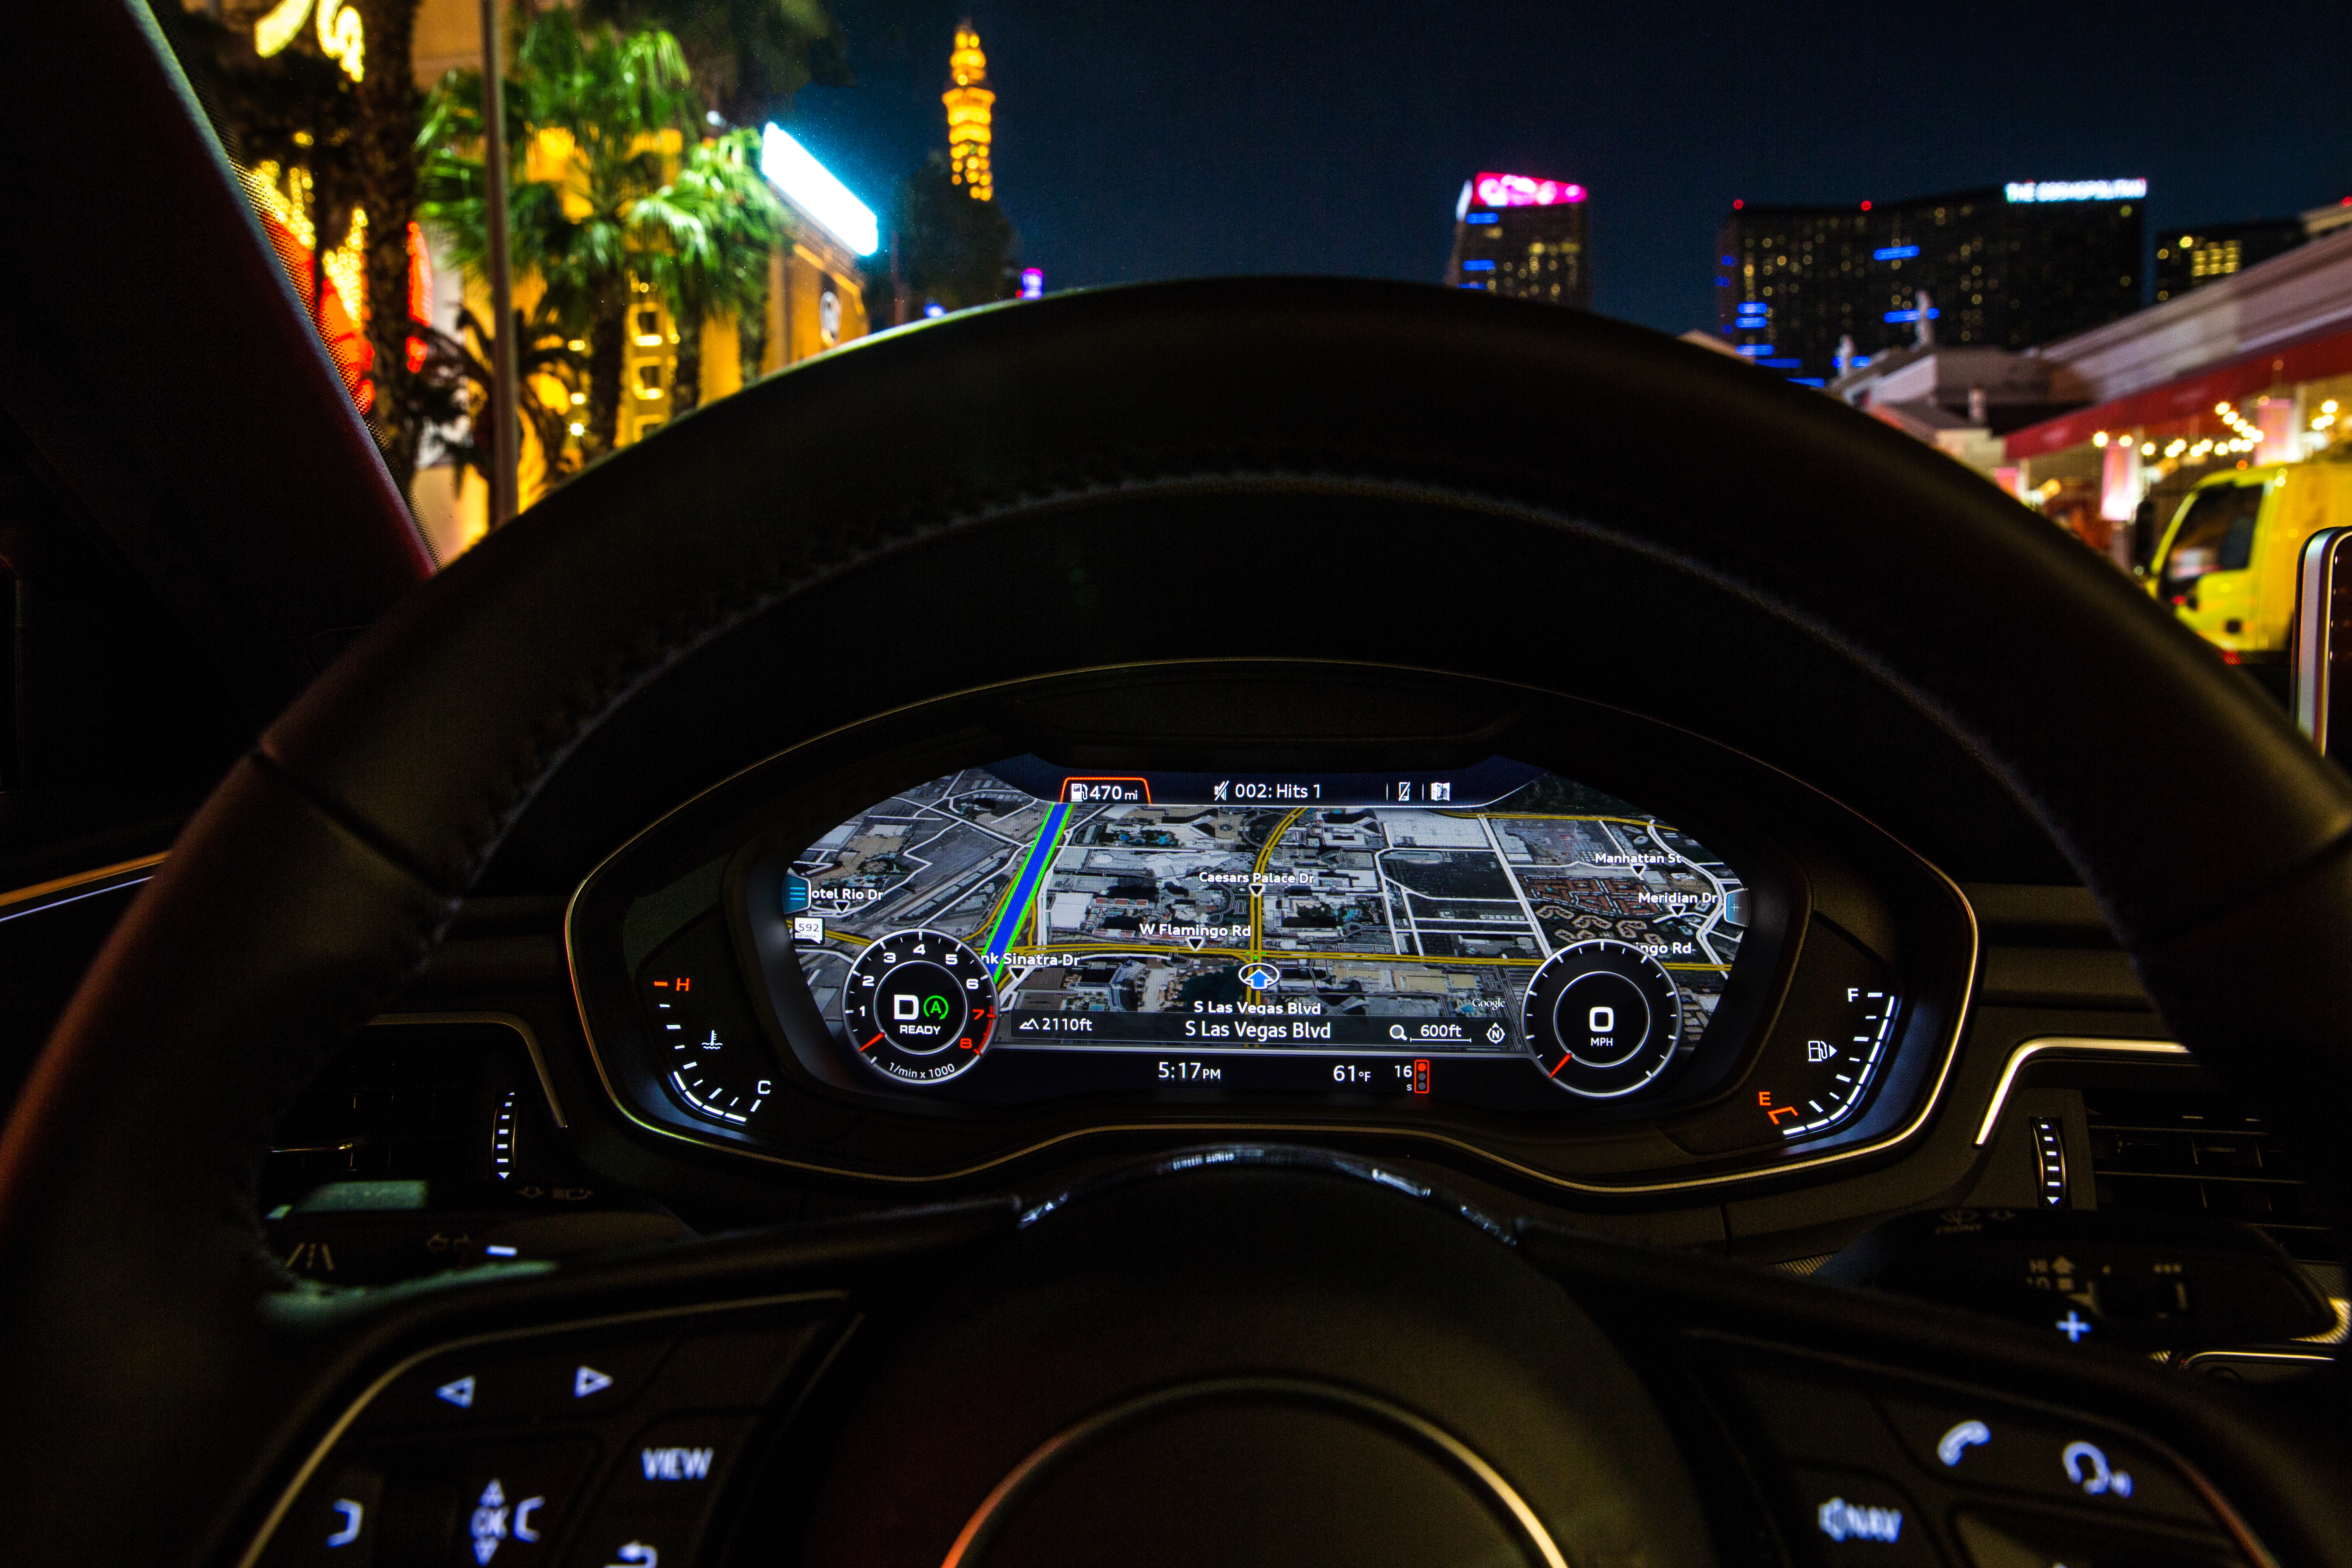 OLED display: the next step with the Audi virtual cockpit